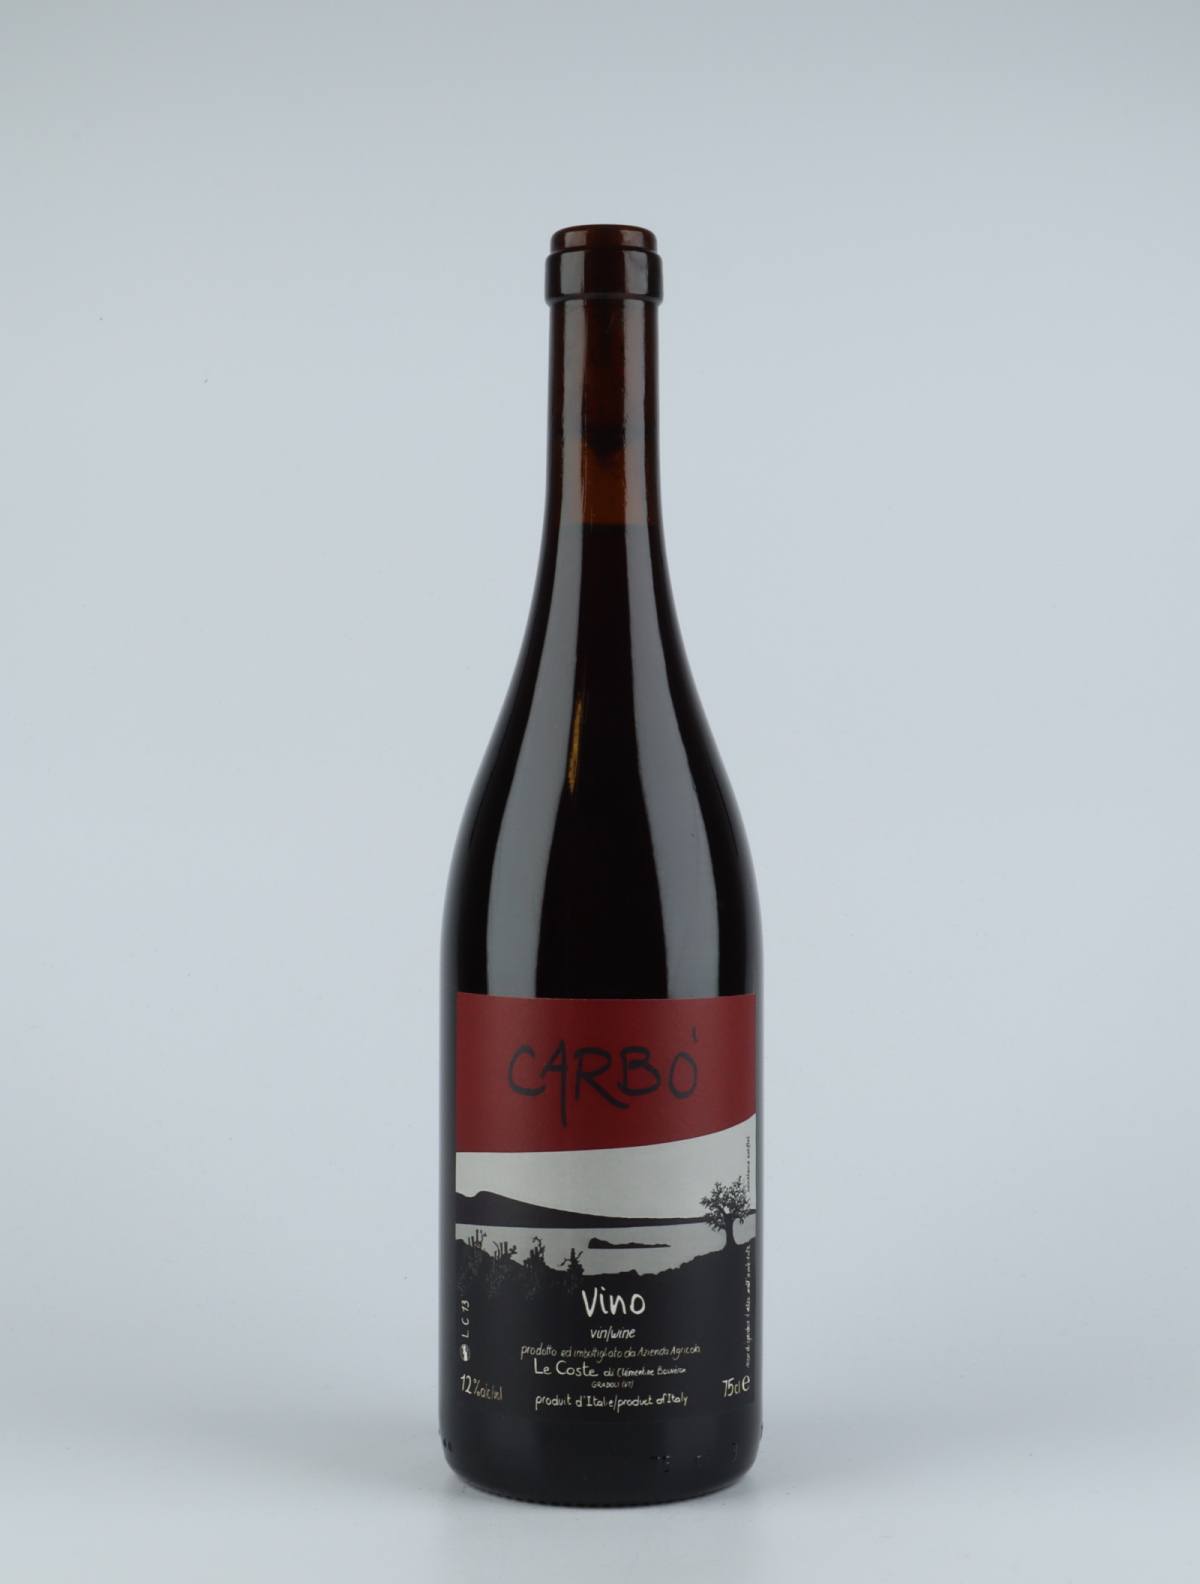 A bottle 2013 Carbó Red wine from Le Coste, Lazio in Italy